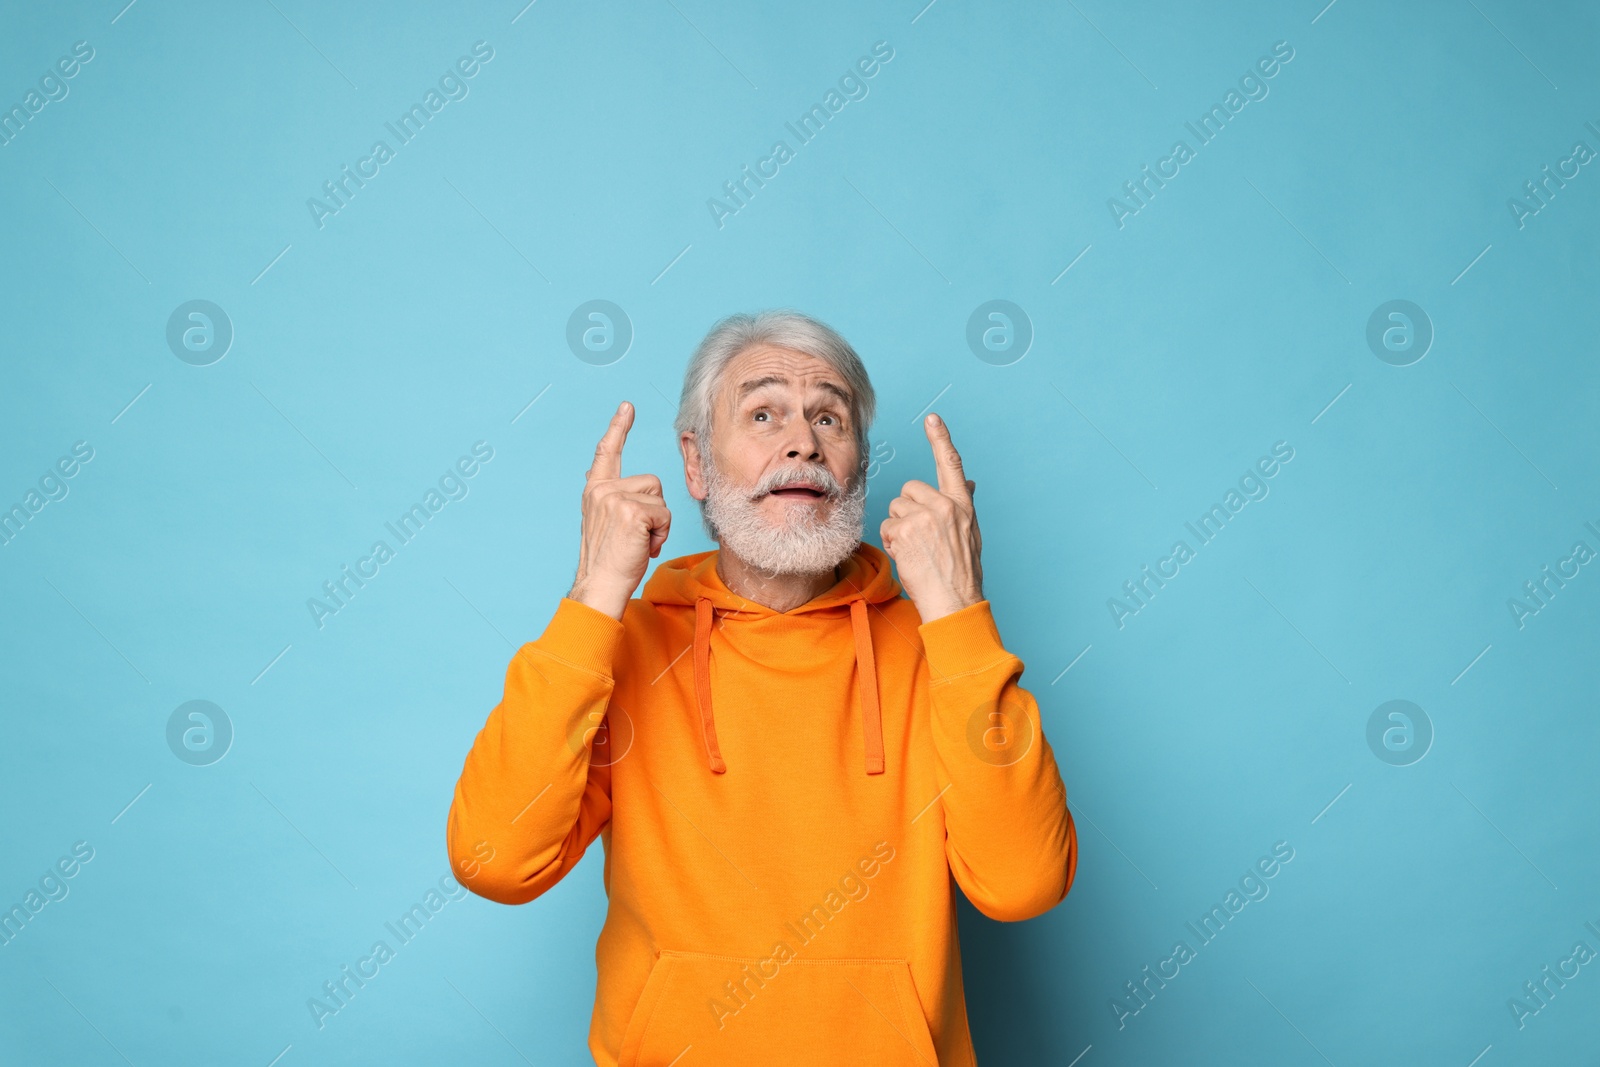 Photo of Senior man with mustache pointing at something on light blue background